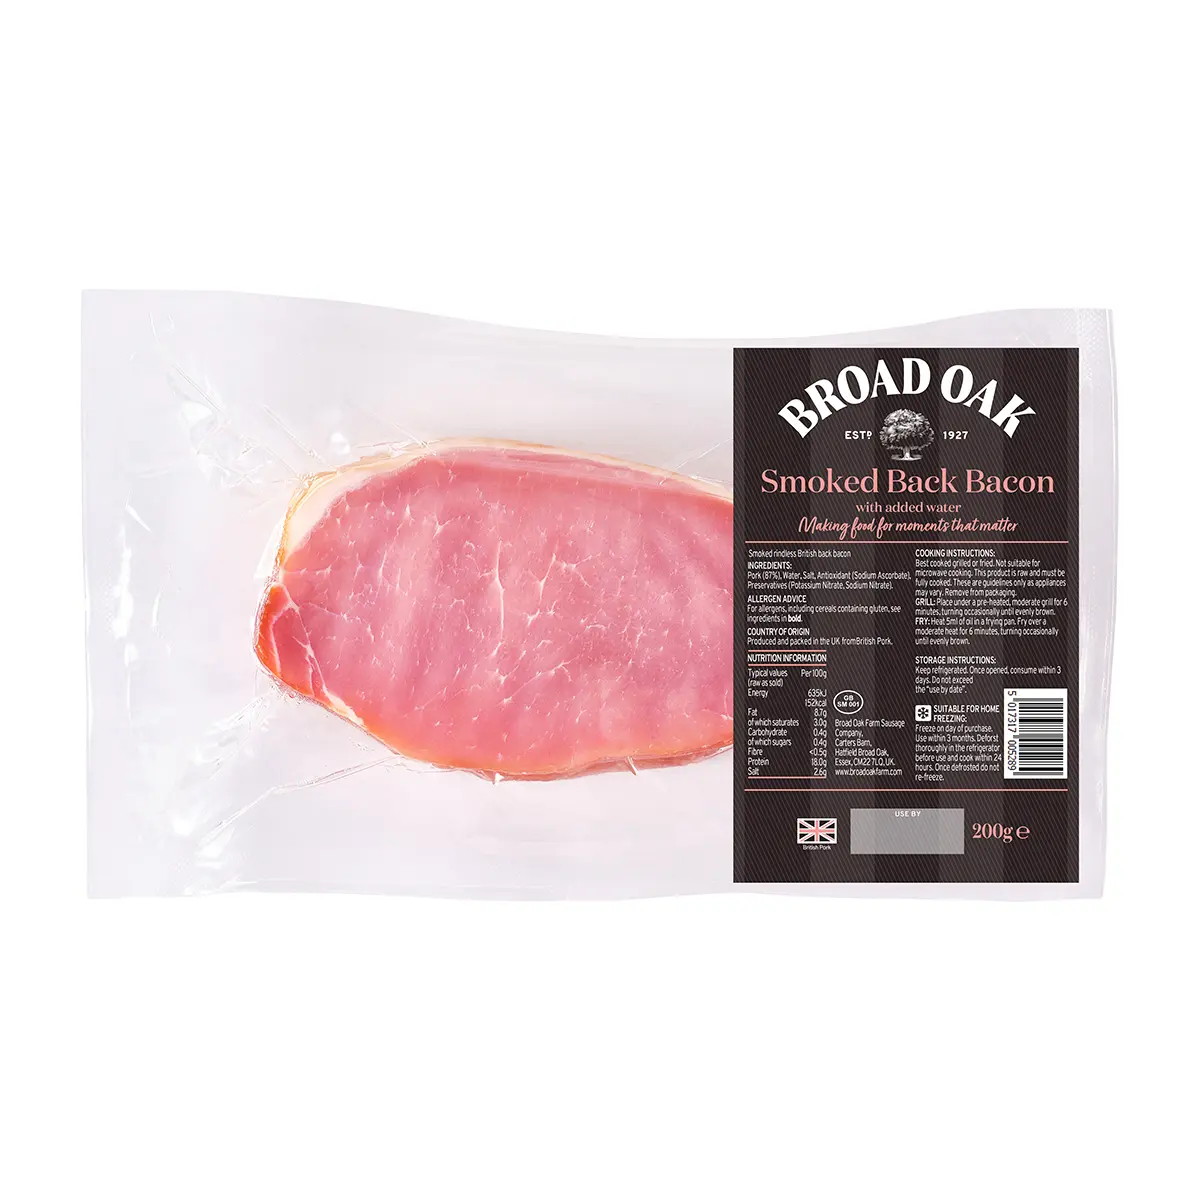 calories in smoked back bacon - How many calories in a rasher of smoked bacon